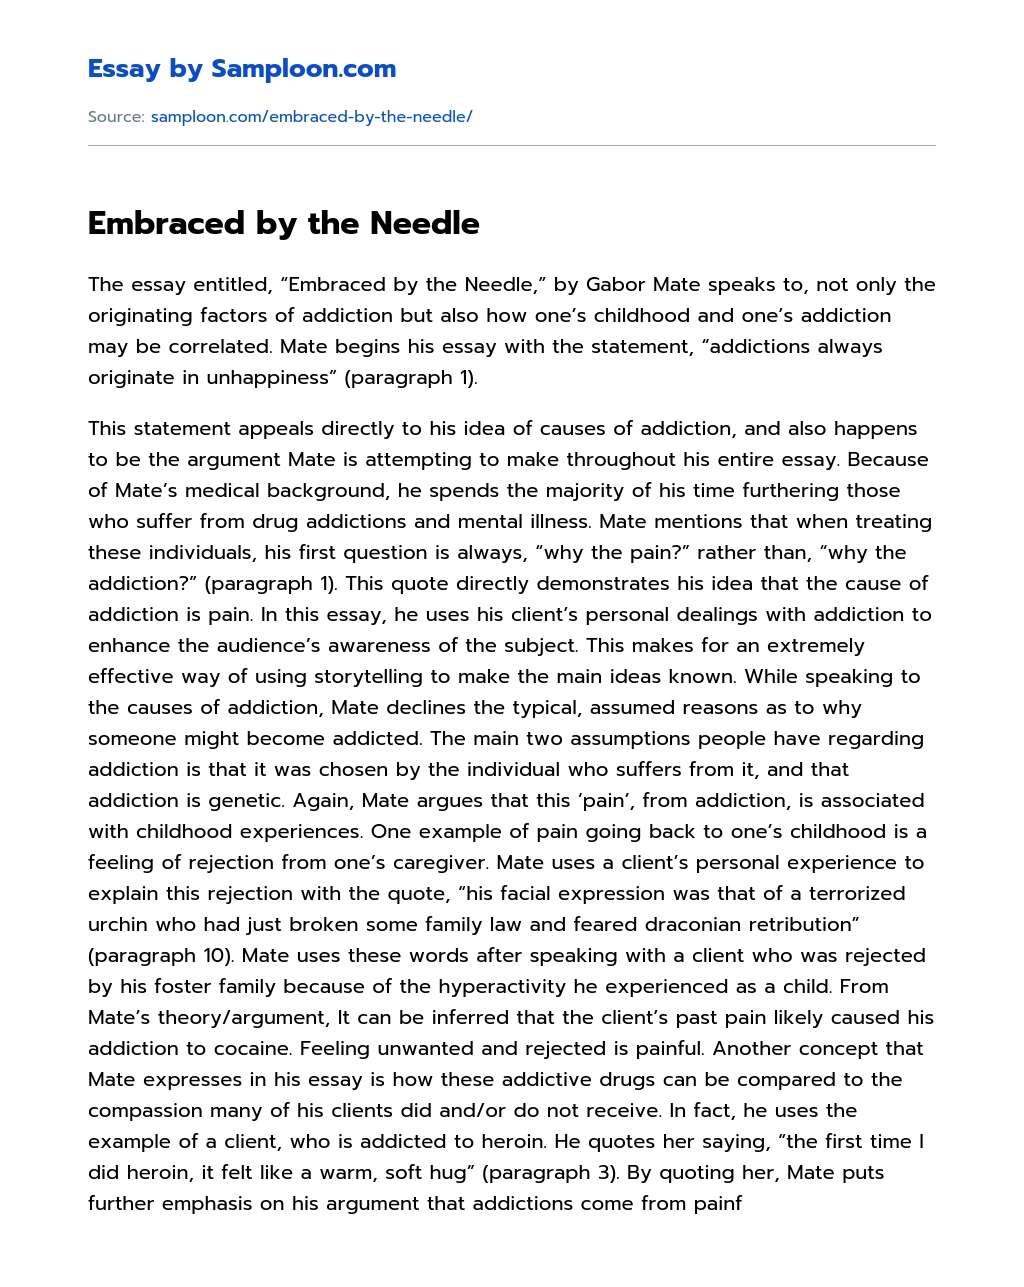 Embraced by the Needle Summary essay